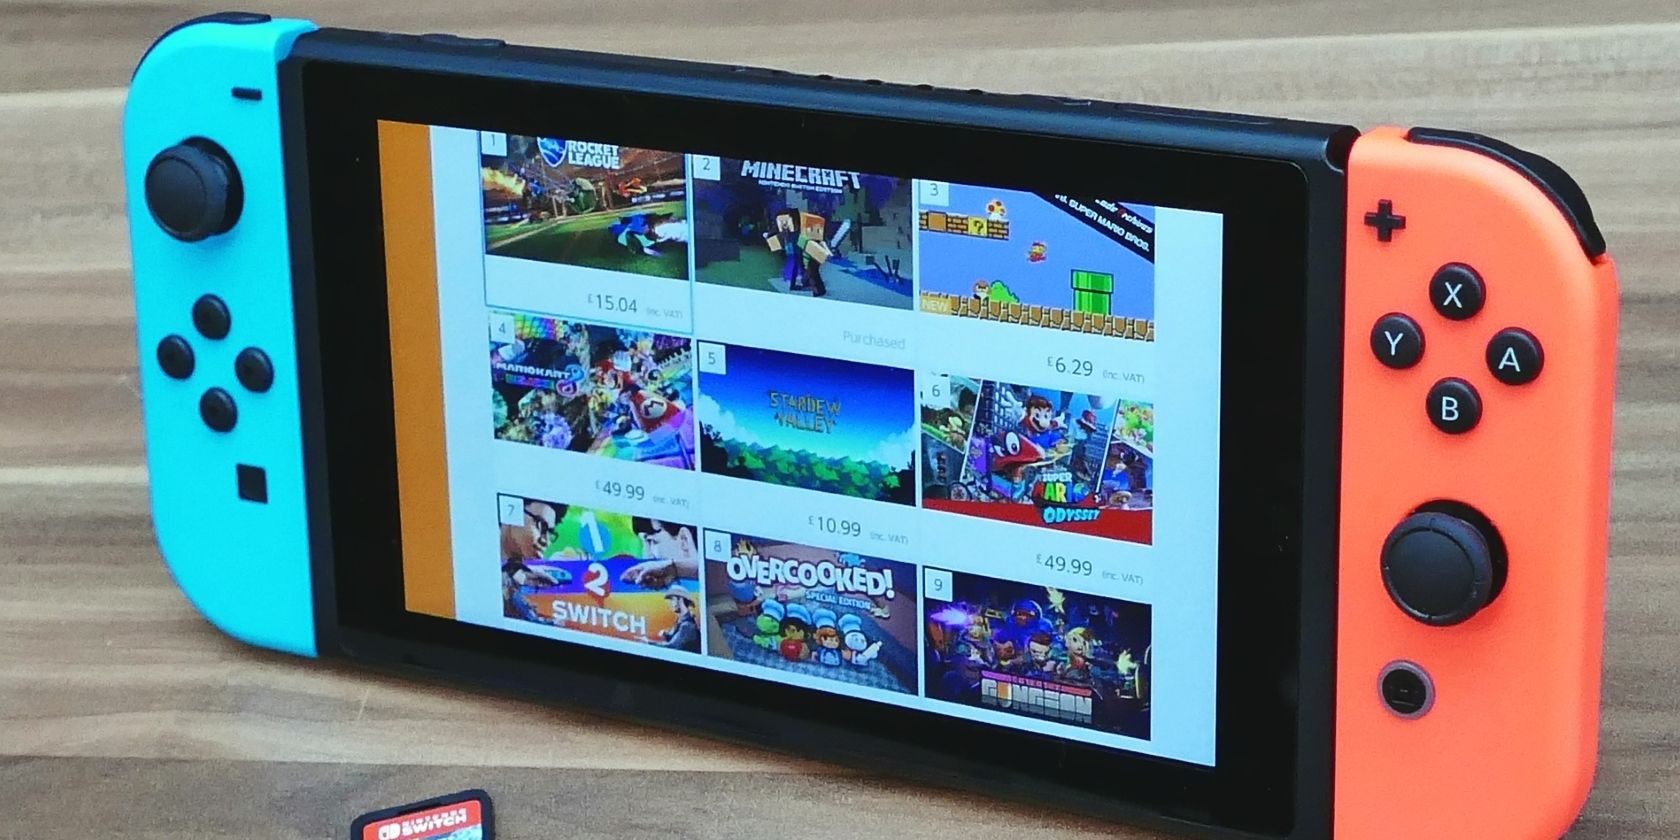 A photograph of a Nintendo Switch console with red and blue Joy Cons and Games and Apps displayed on screen